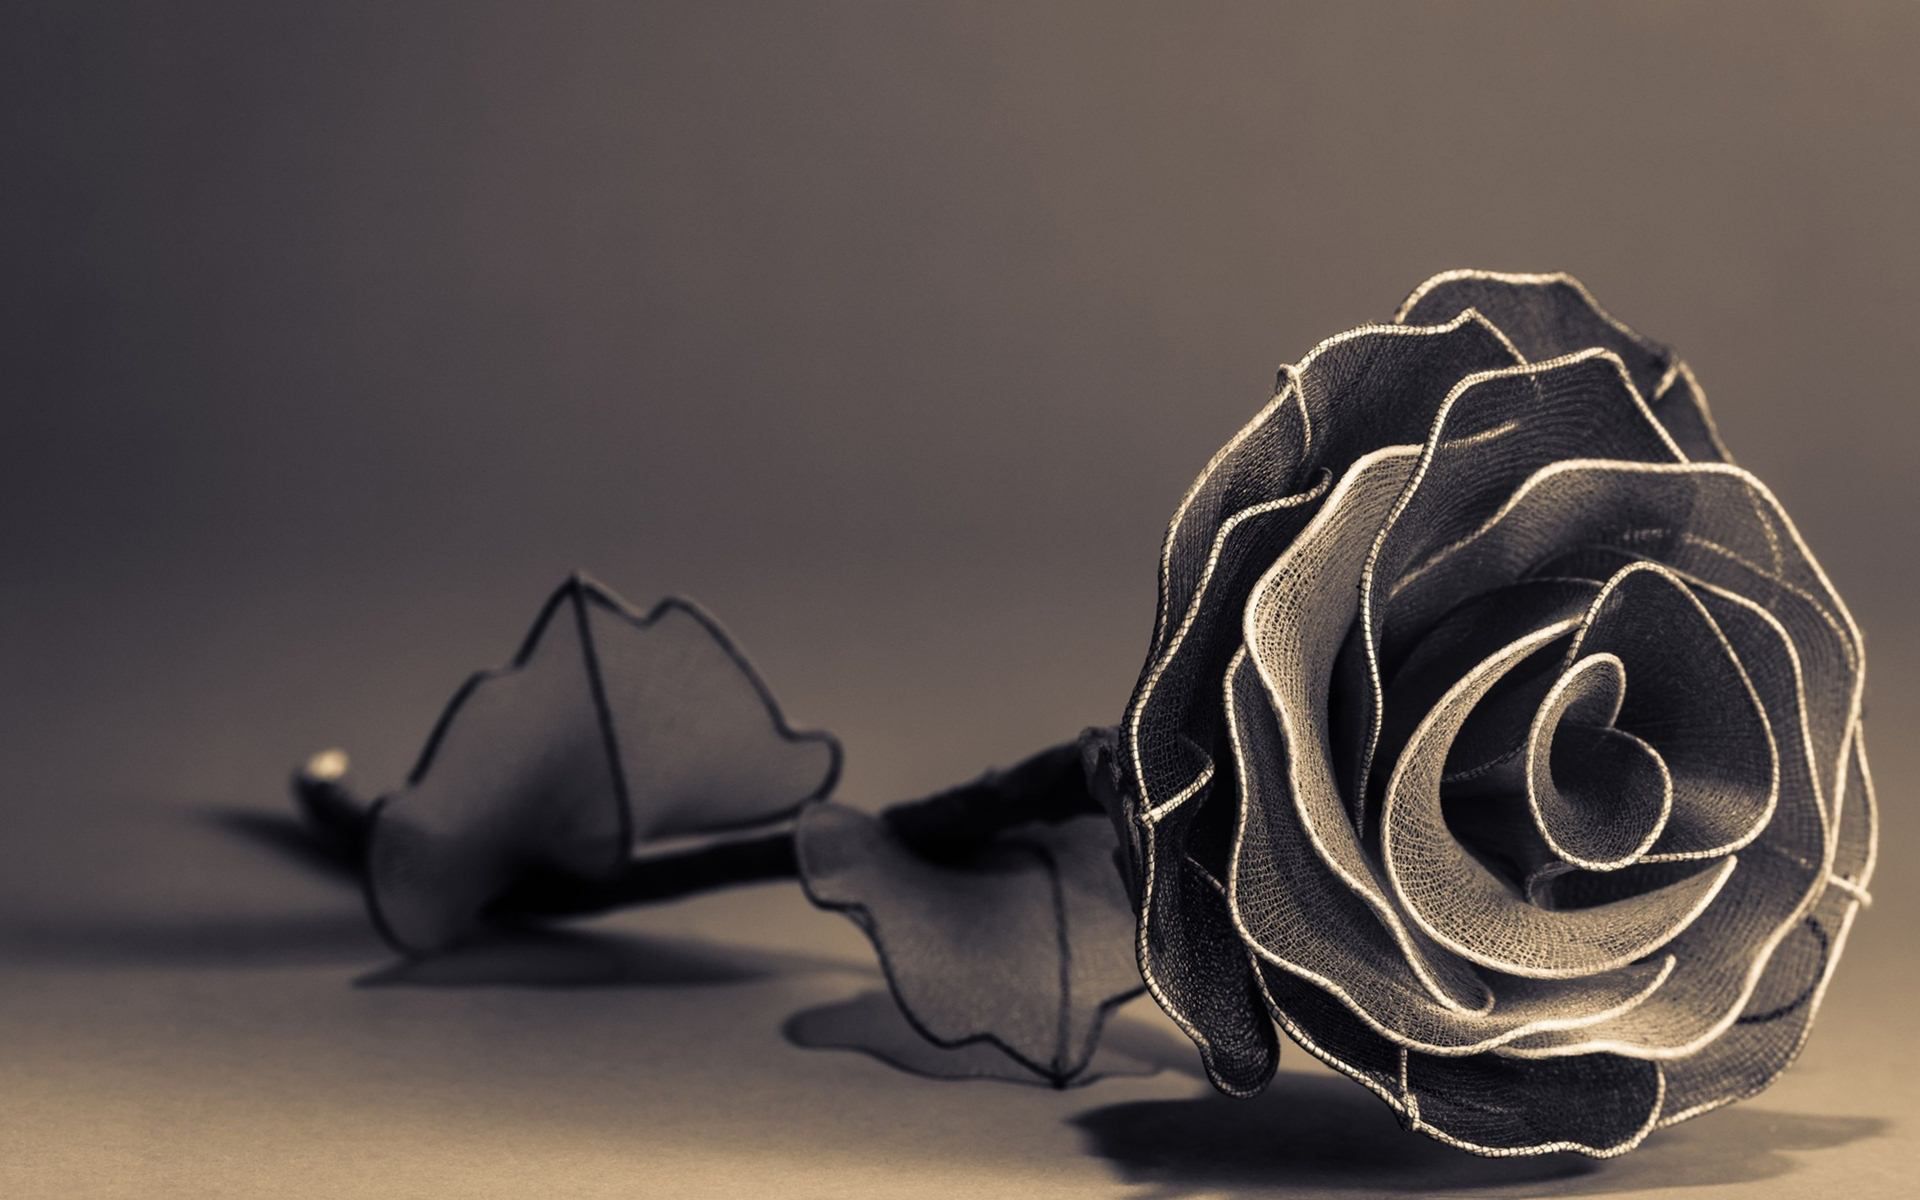 Wallpapers Of Black Roses Group 67